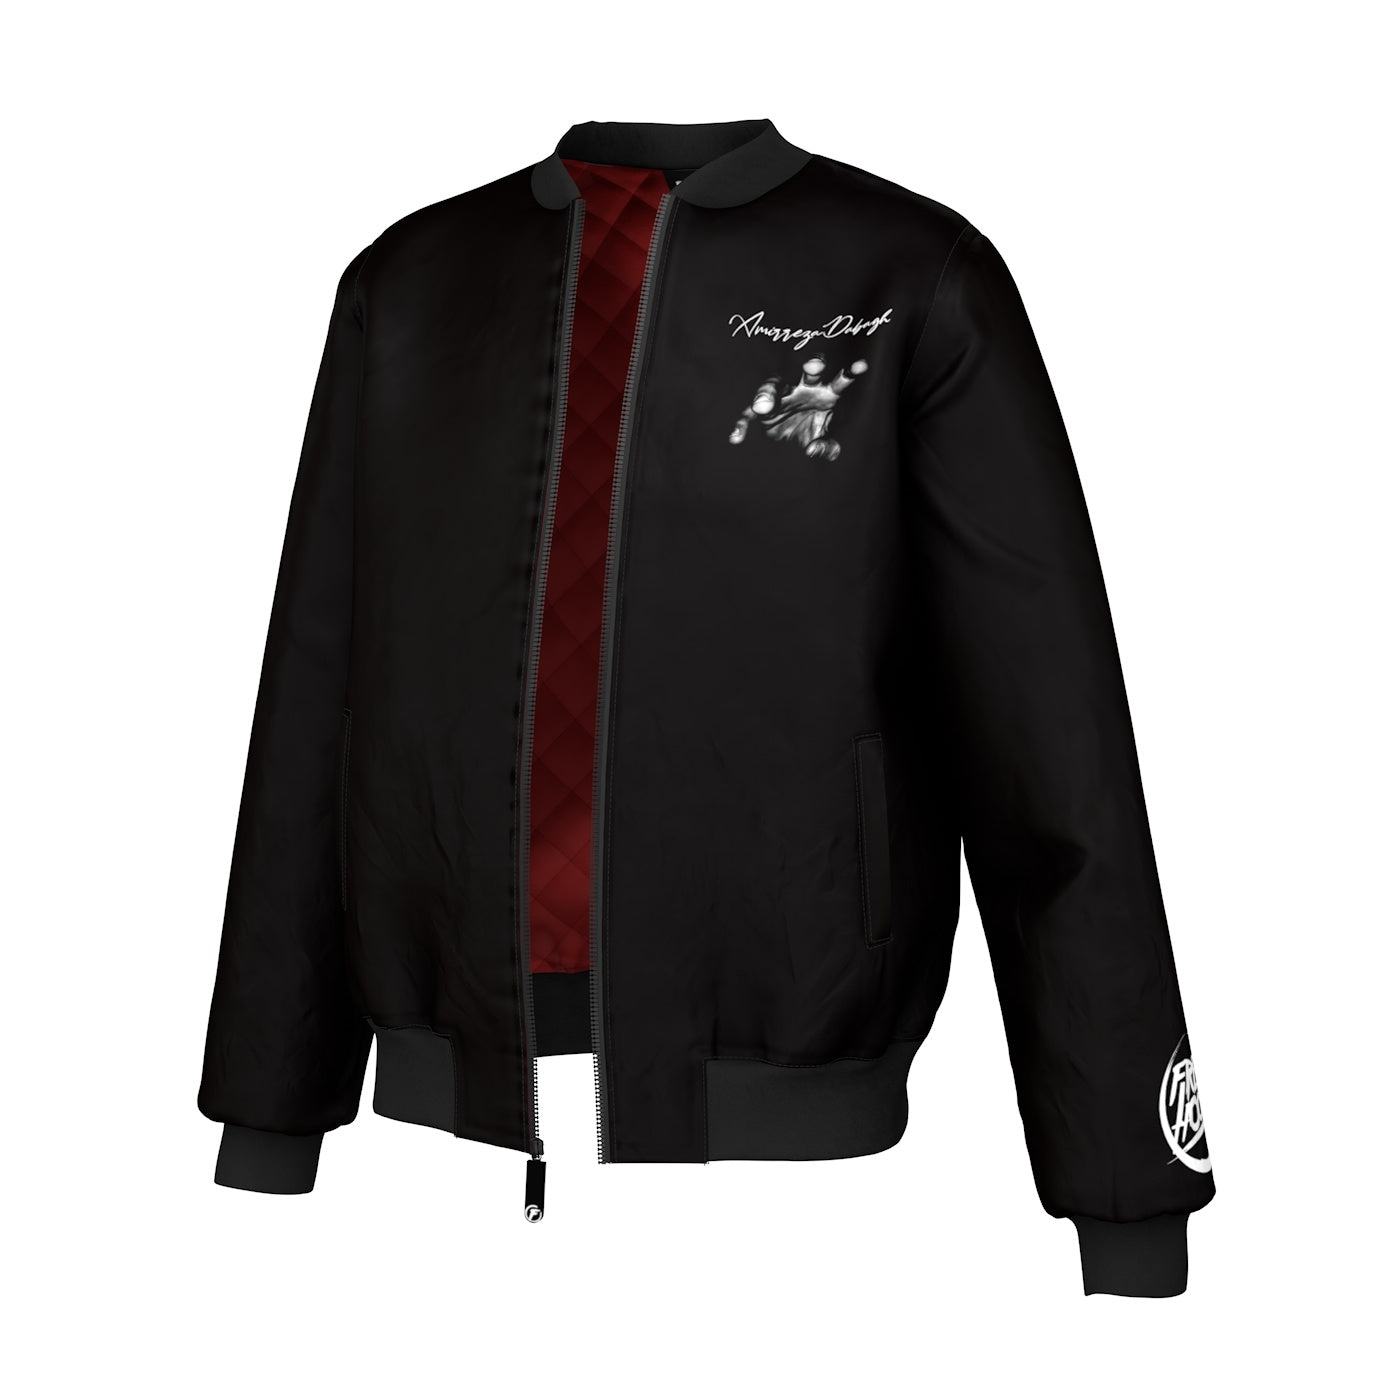 The Other Side Bomber Jacket